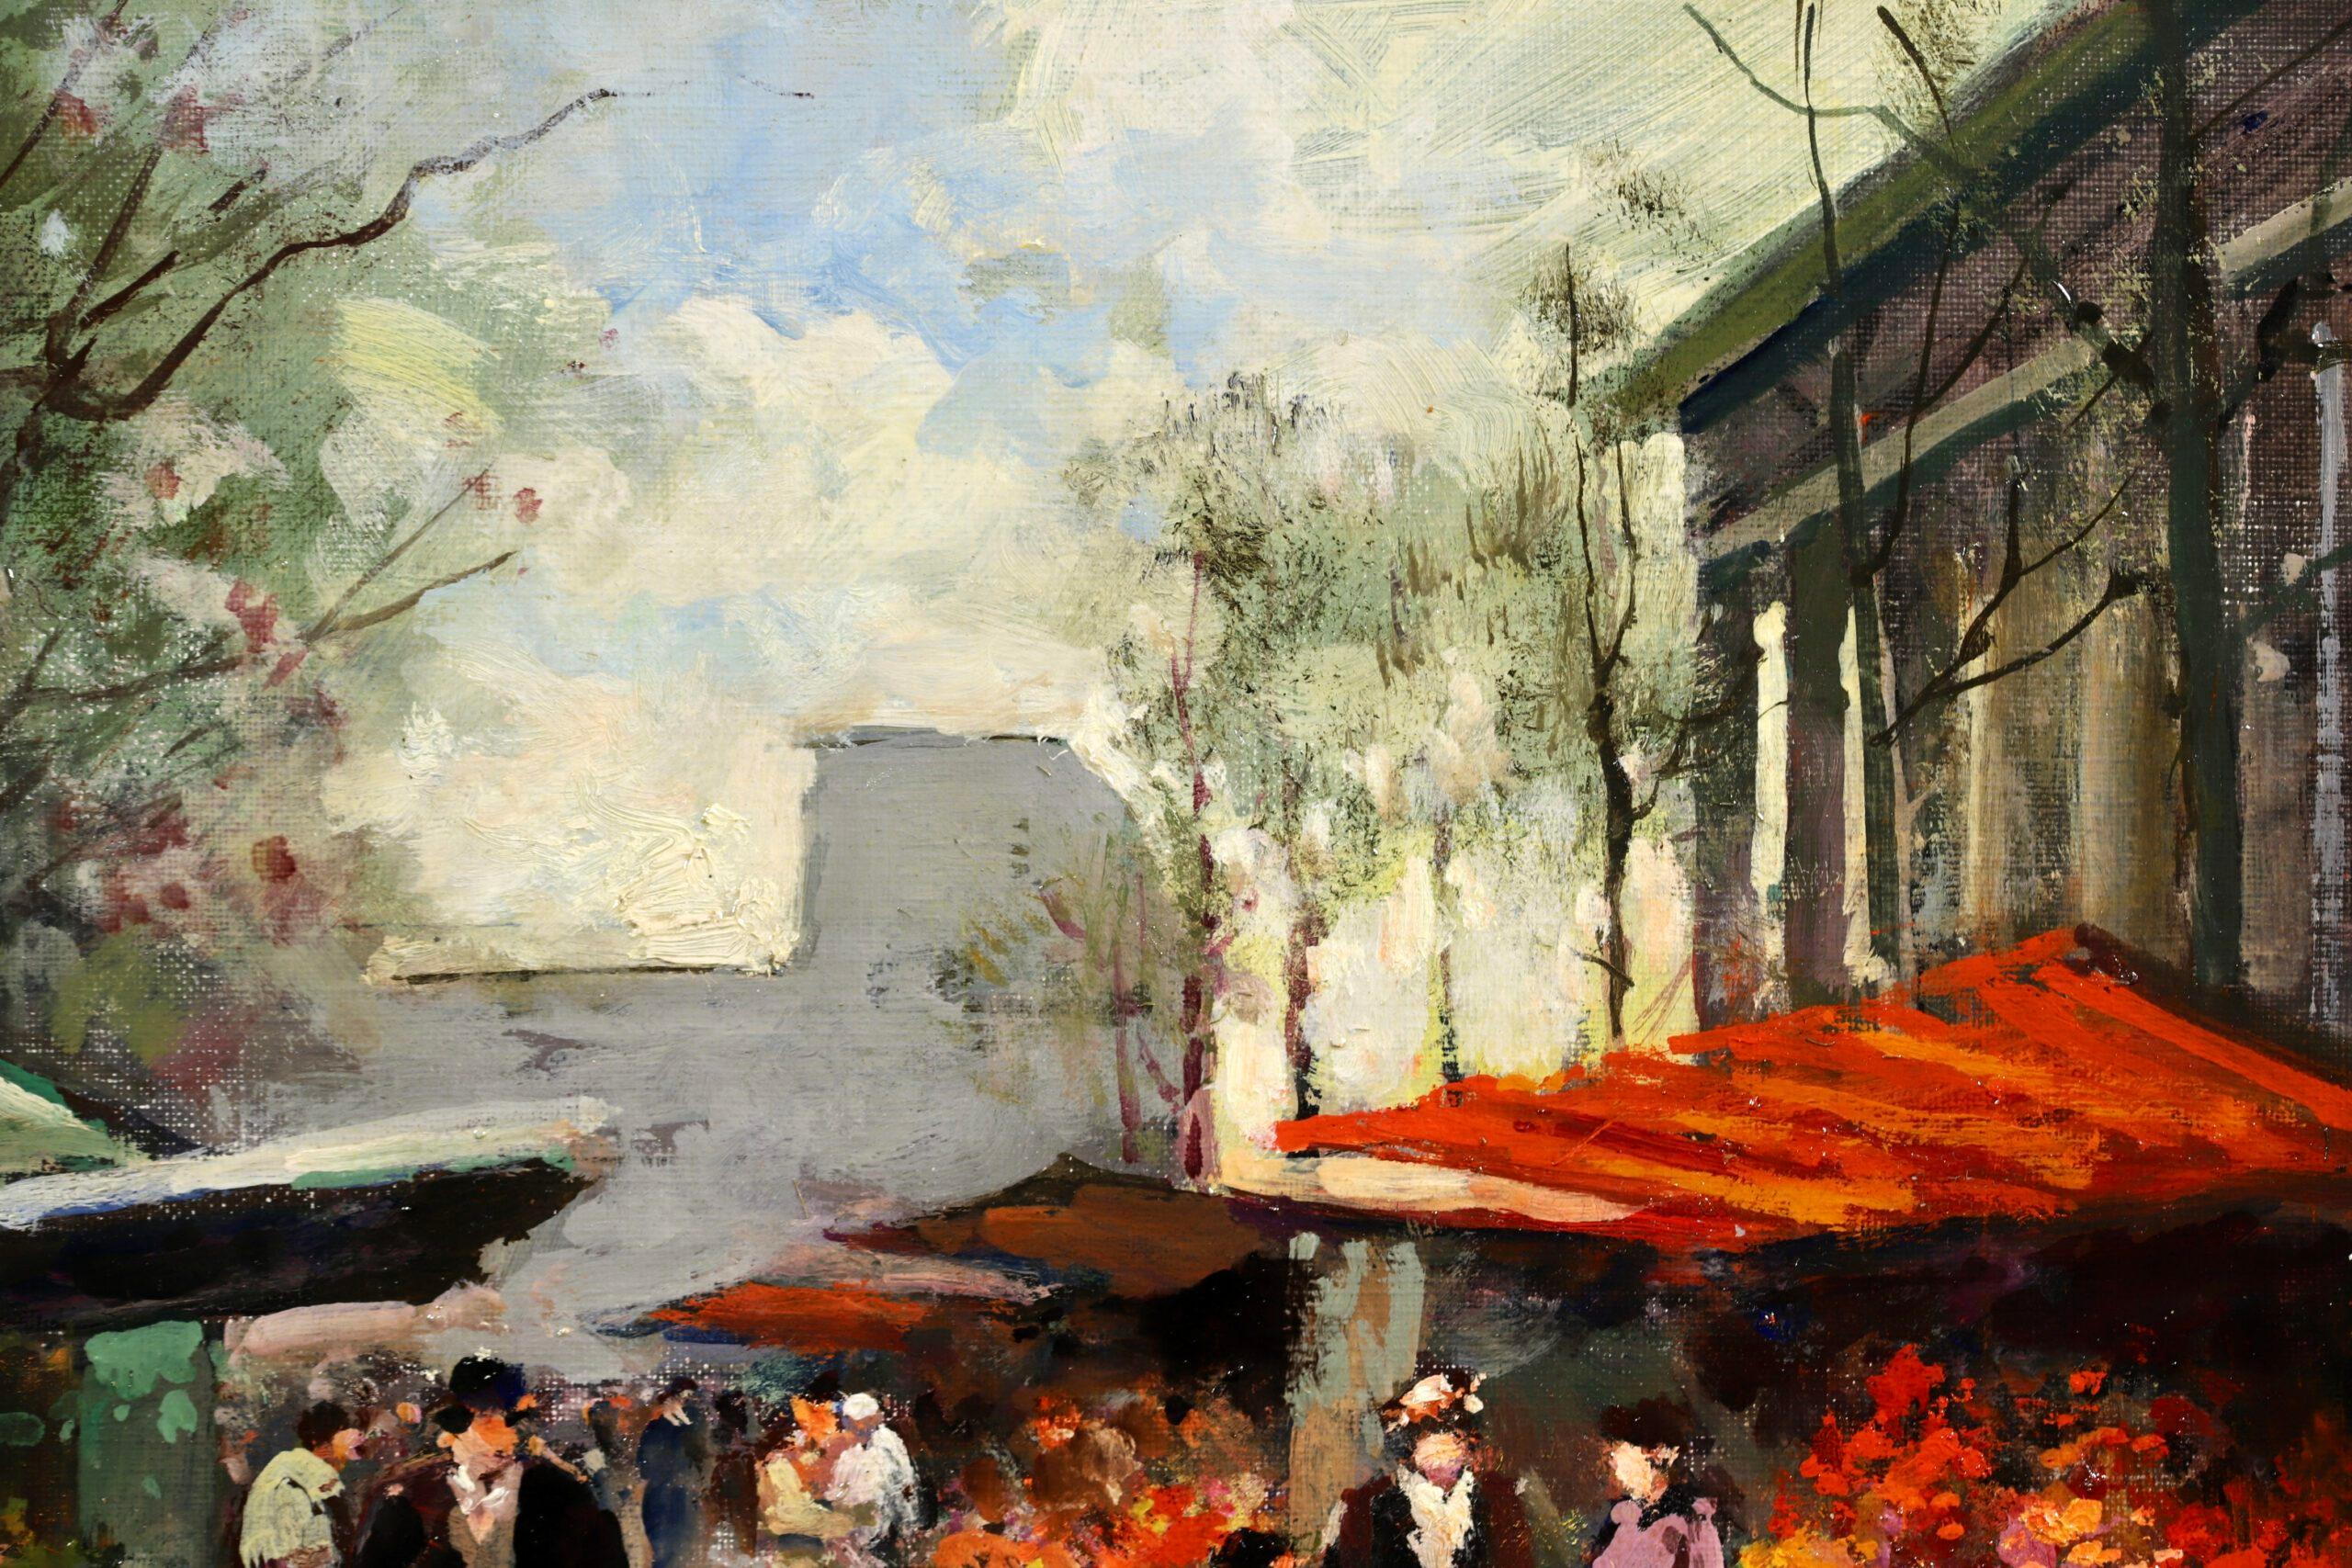 Signed impressionist oil on canvas cityscape circa 1960 by French painter Edouard Leon Cortes. The work depicts figures in the flower market at the Place de la Madeleine in Paris, France. The bright colours of the flowers and the red awnings